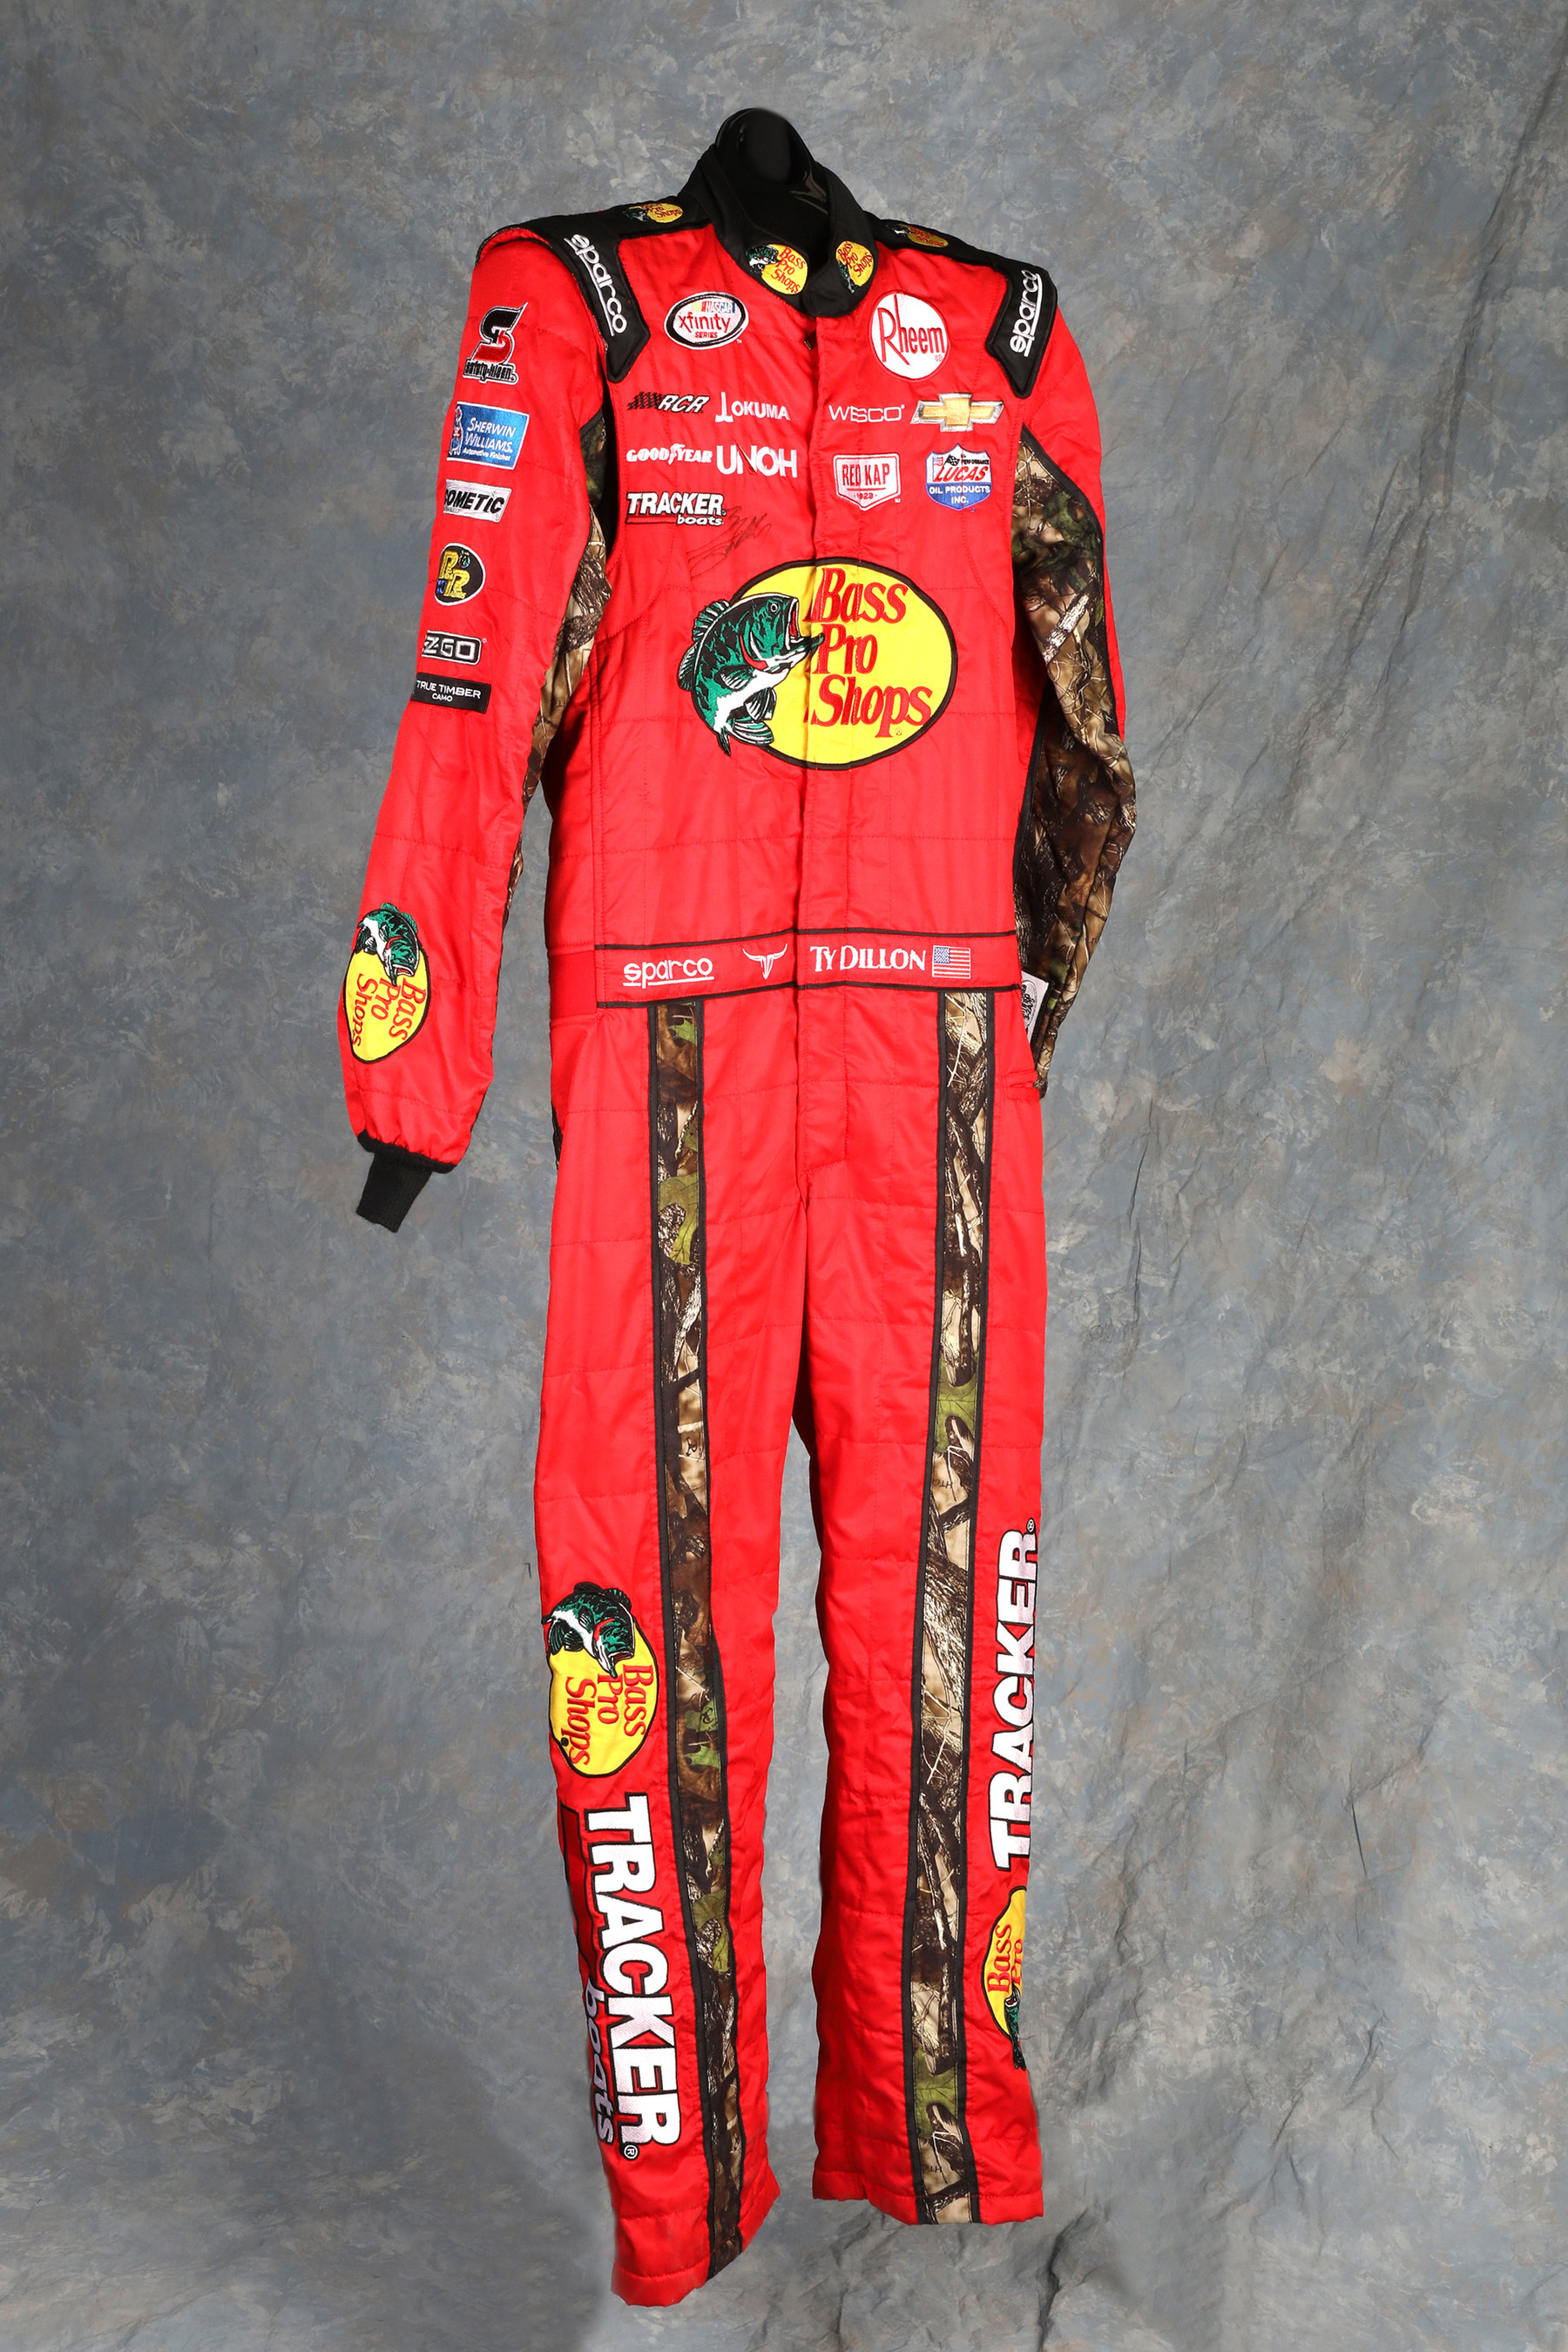 eBay - NASCAR Foundation - Sparco Bass Pro Shops Race-Used Fire Suit autographed by Monster Energy NASCAR Cup Series Driver Ty Dillon